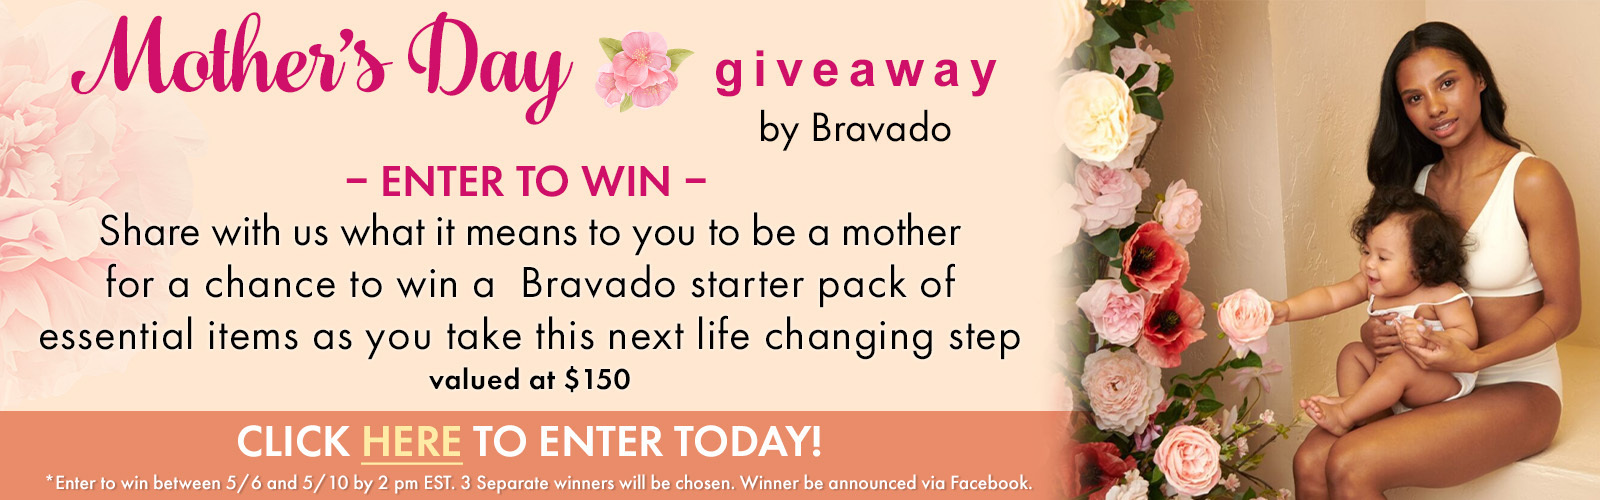 Bravado Mother's Day Giveaway Enter to Win